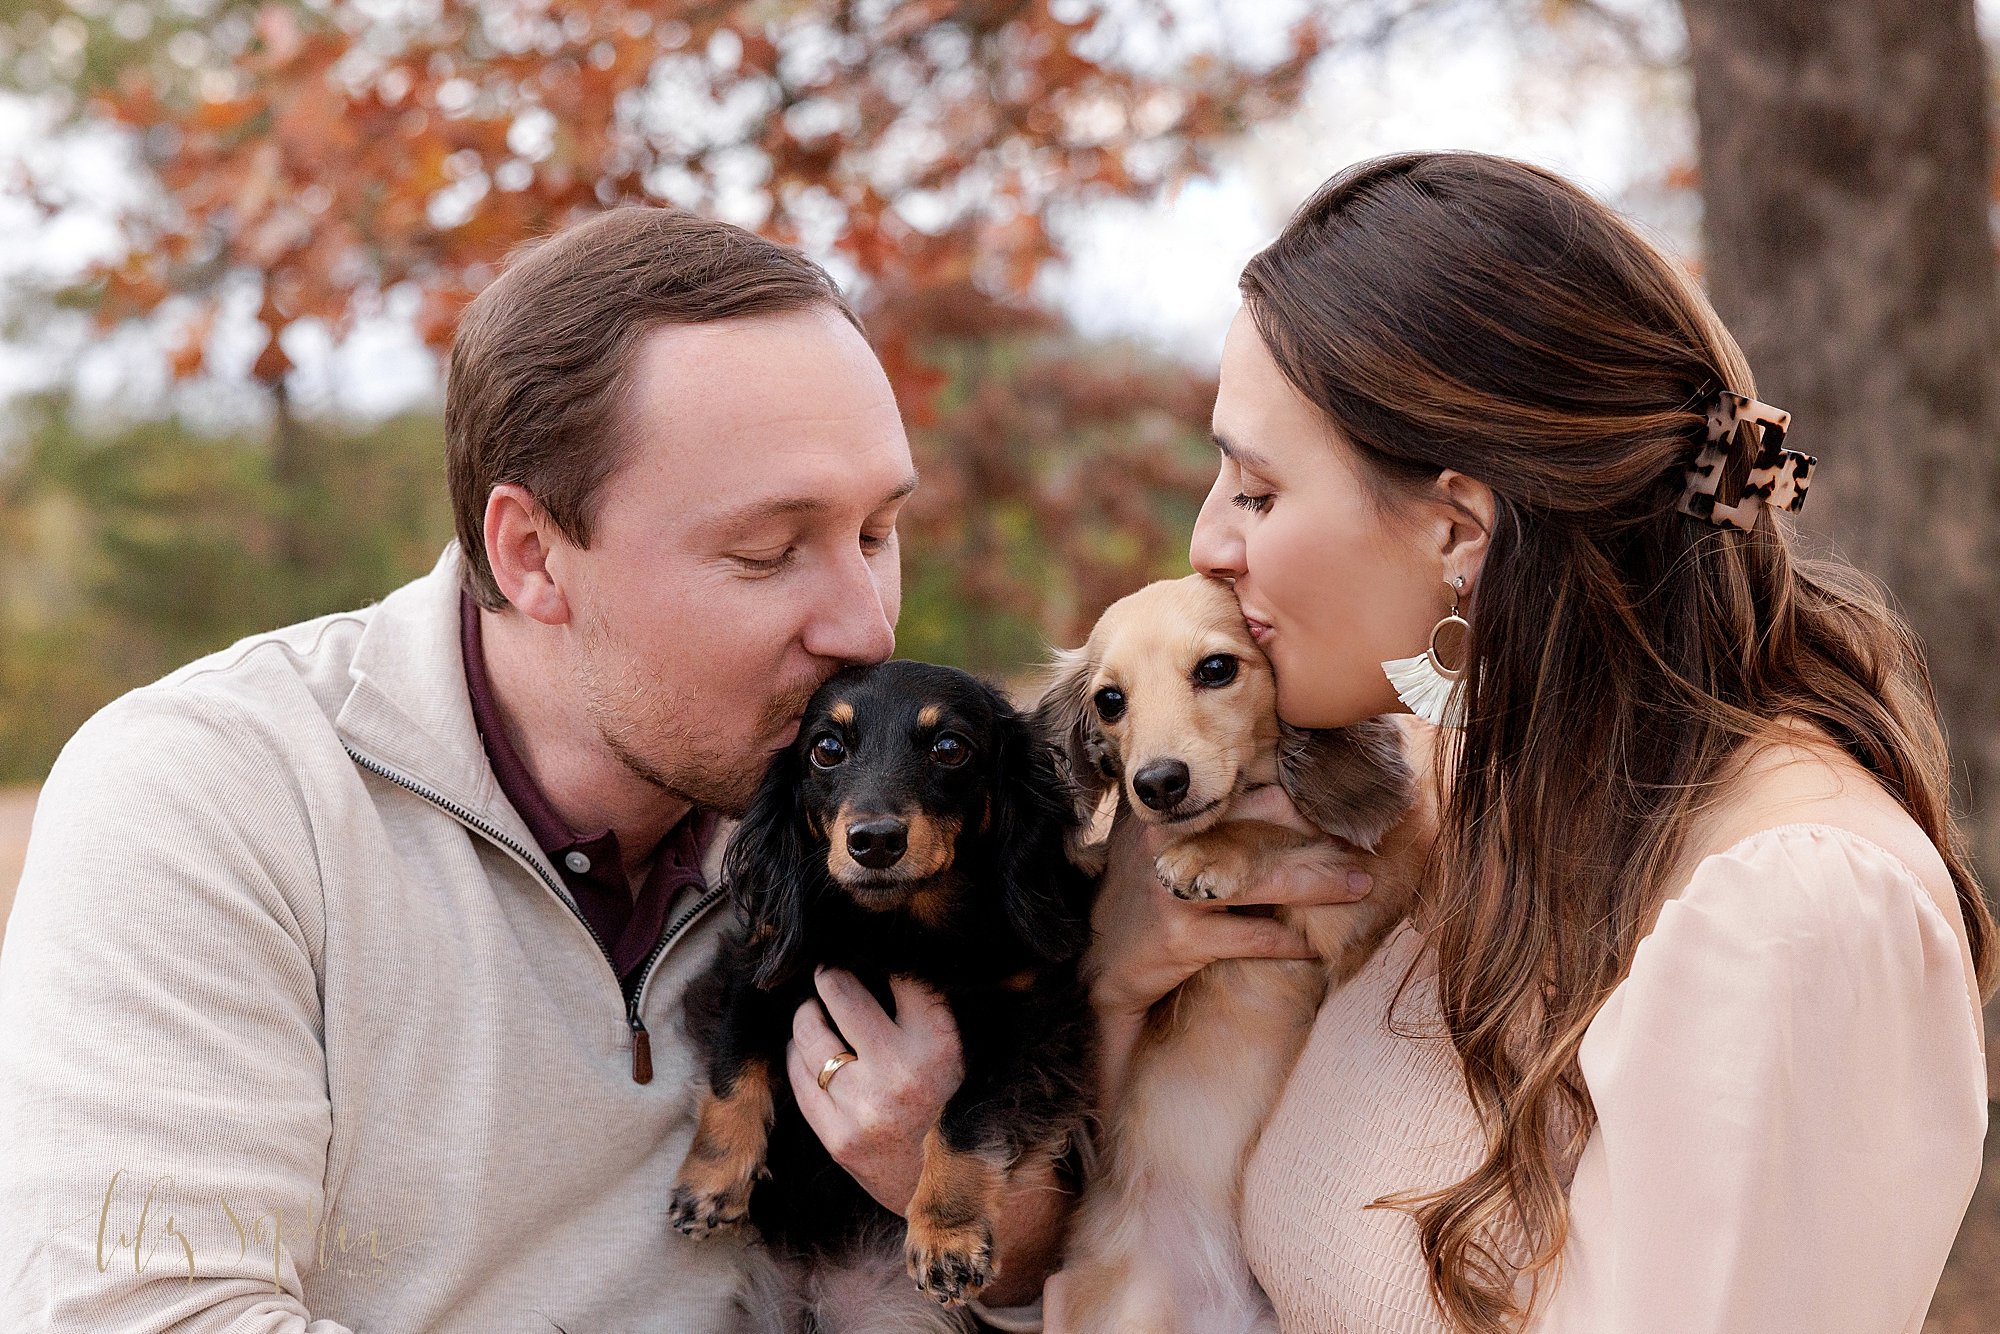 intown-atlanta-morningside-decatur-brookhaven-buckhead-outdoor-couples-maternity-fall-photoshoot-daschunds-doxies-gender-reveal_6197.jpg